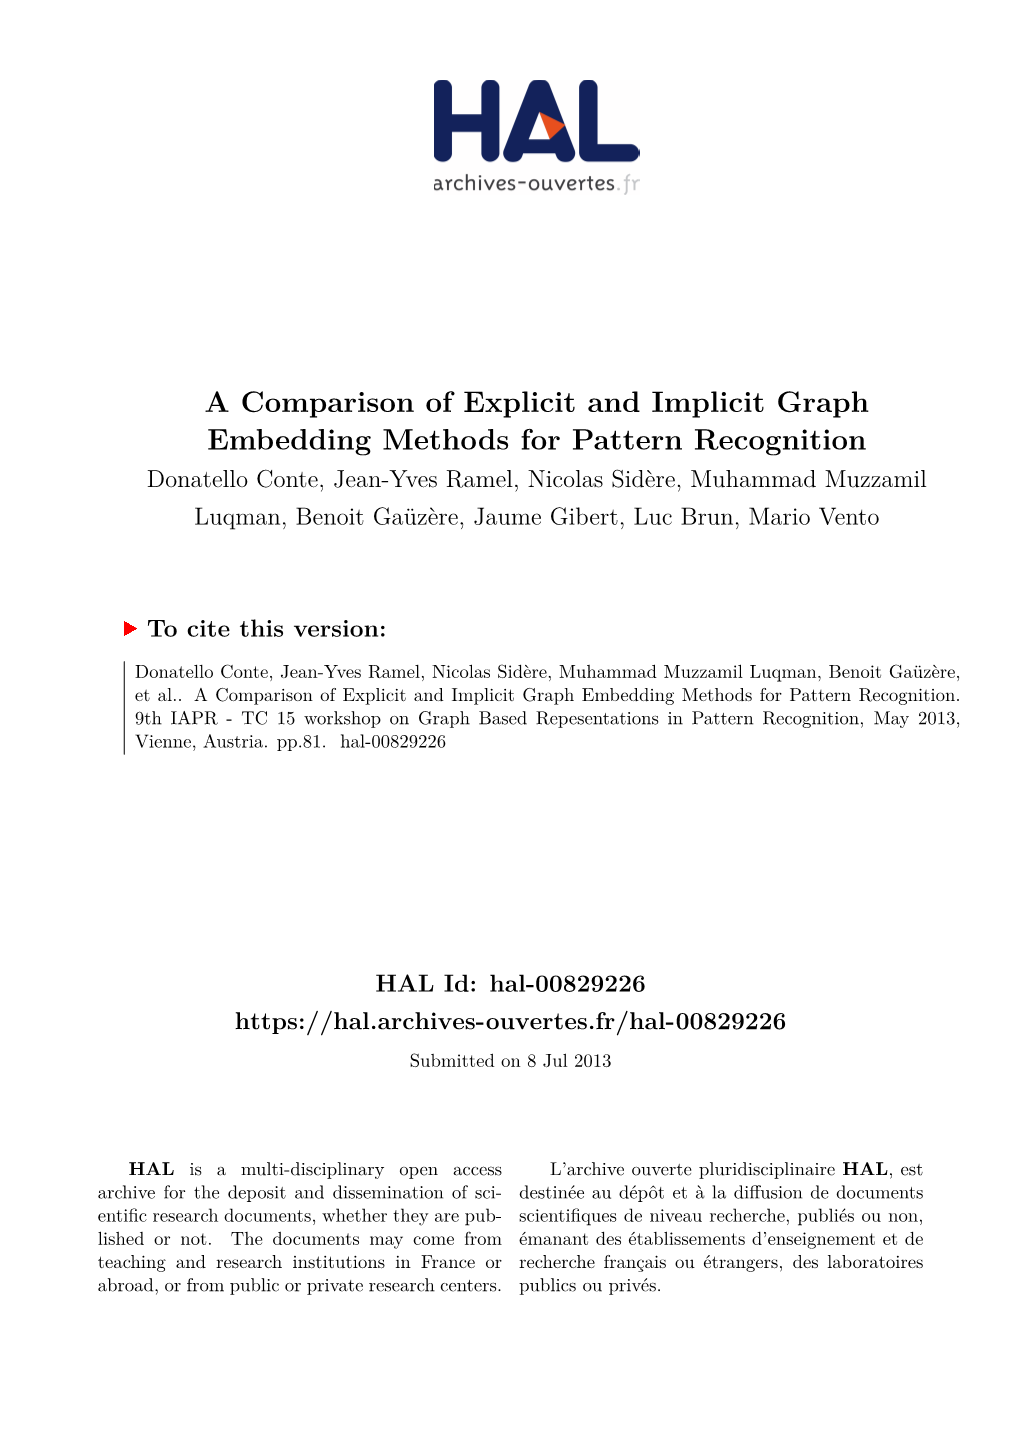 A Comparison of Explicit and Implicit Graph Embedding Methods For